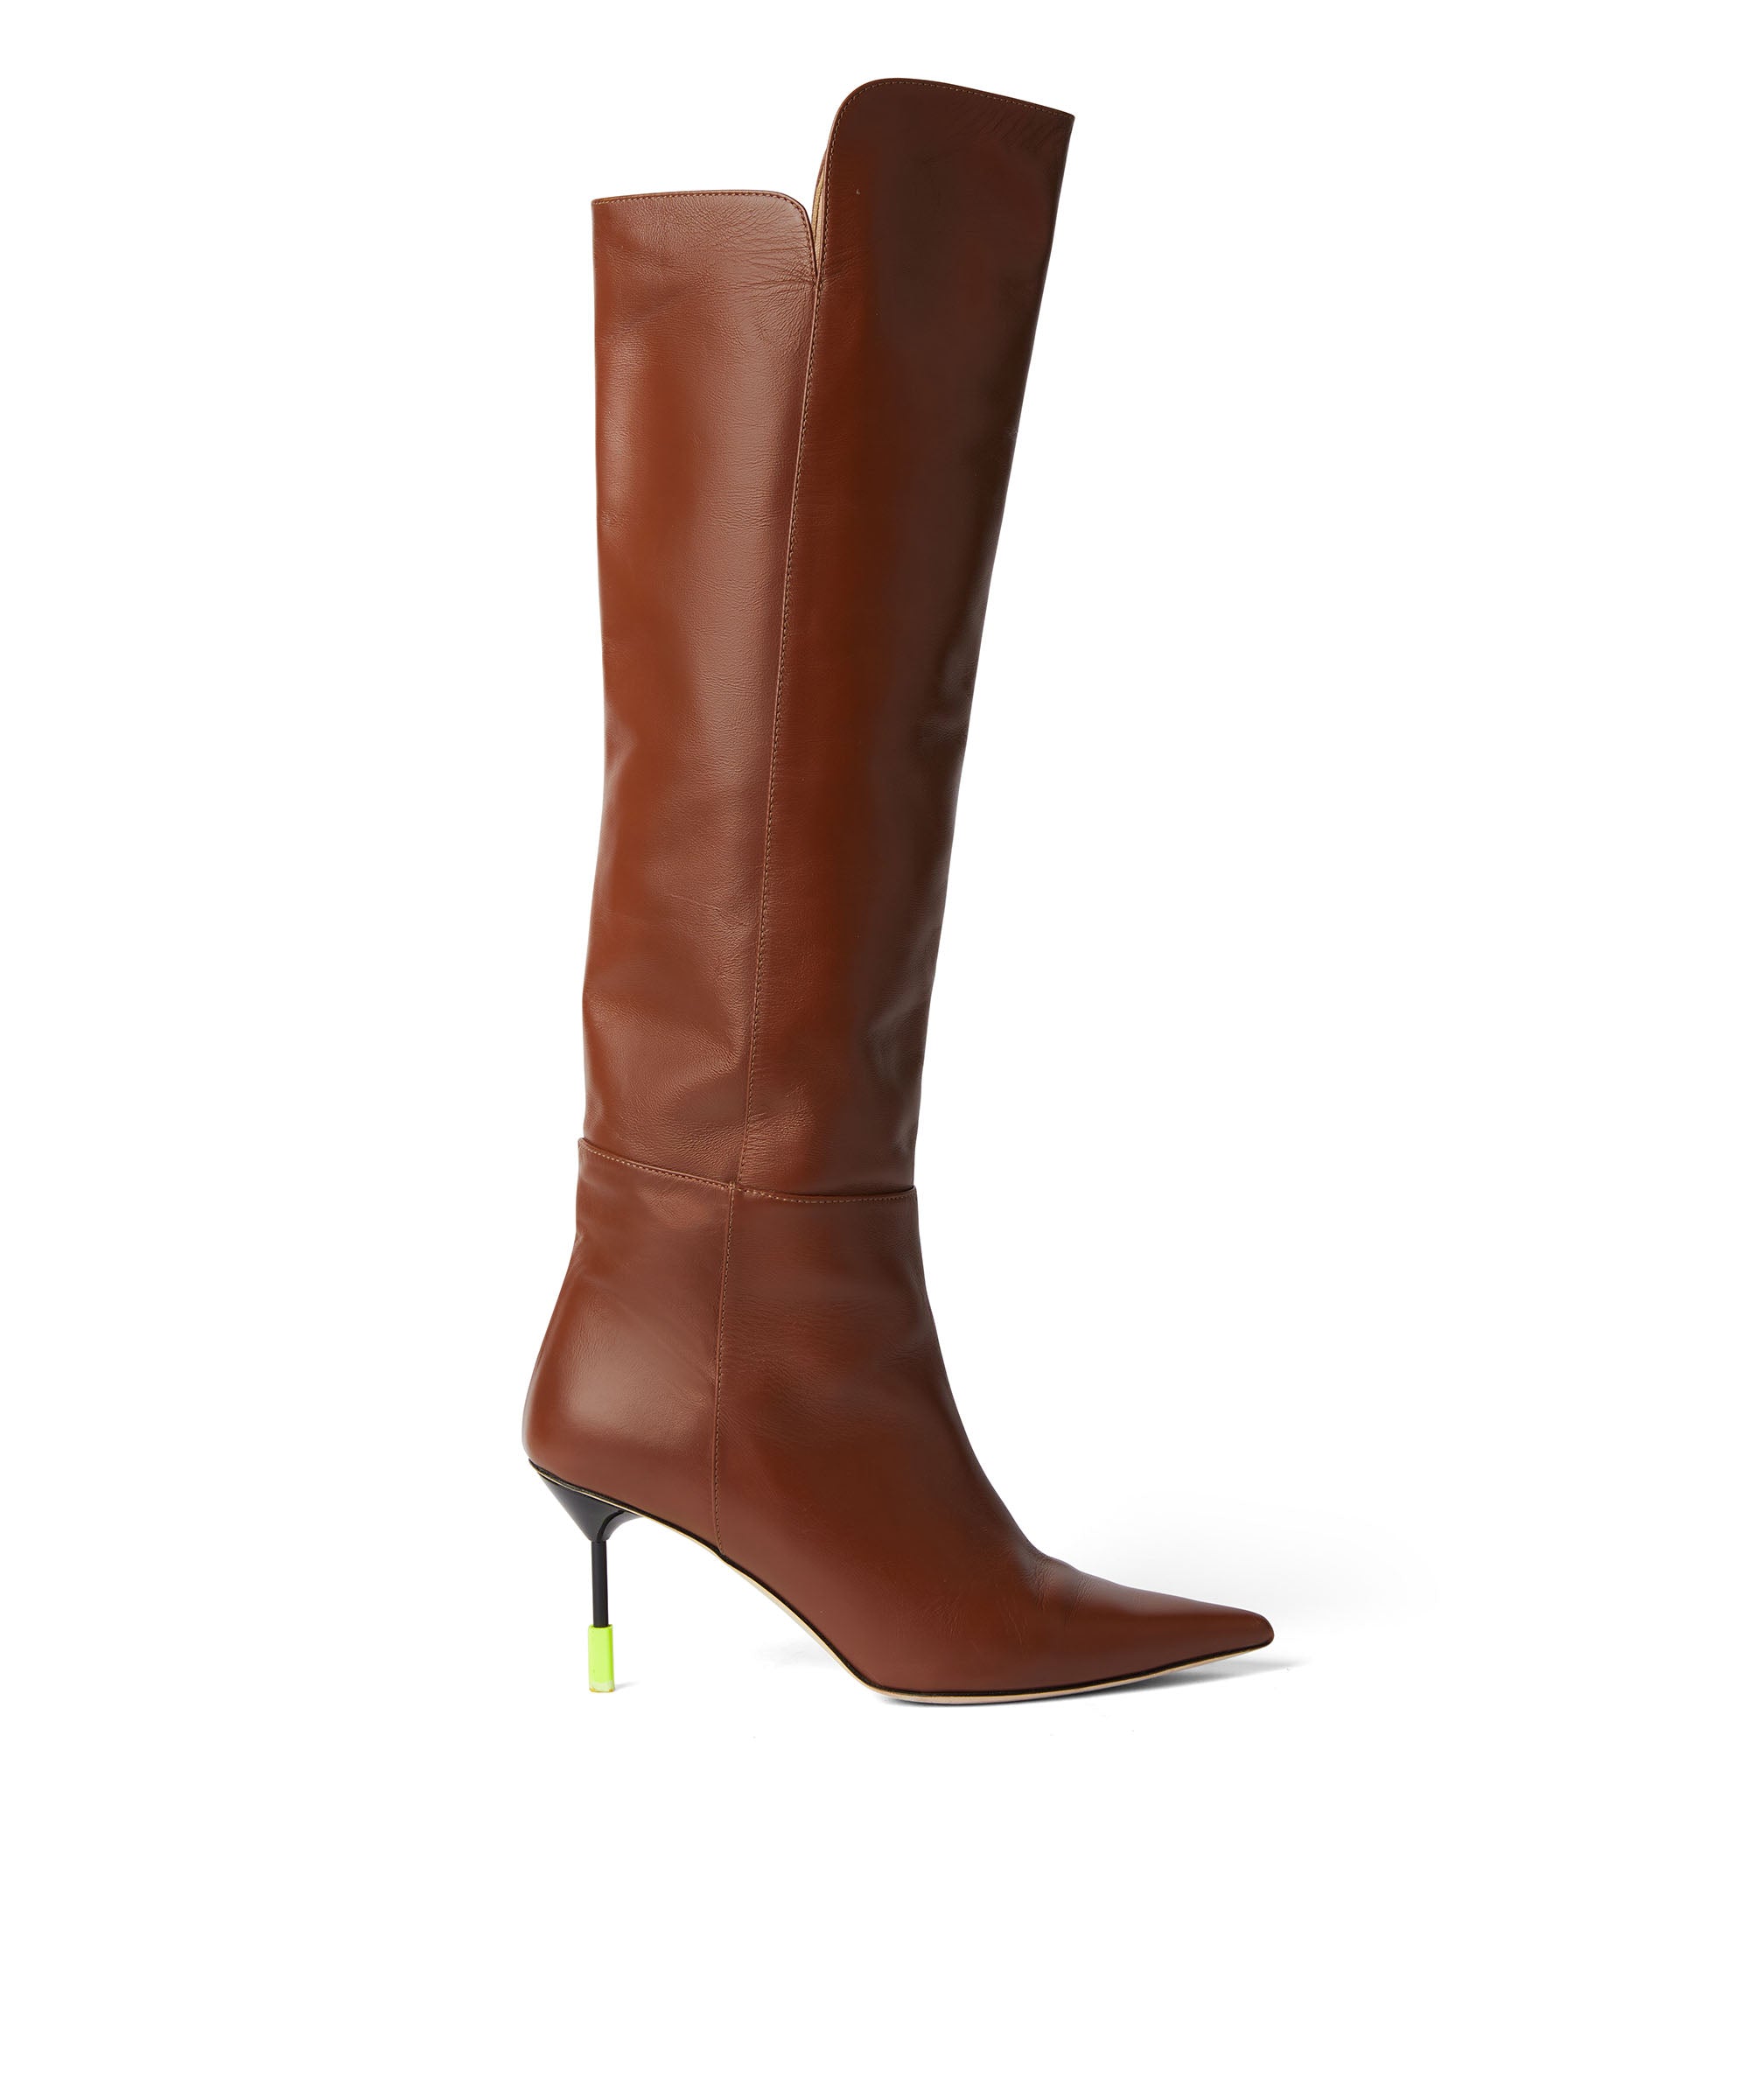 Women's Boots - MSGM Official – MSGM Shop ROW - MSGM Official